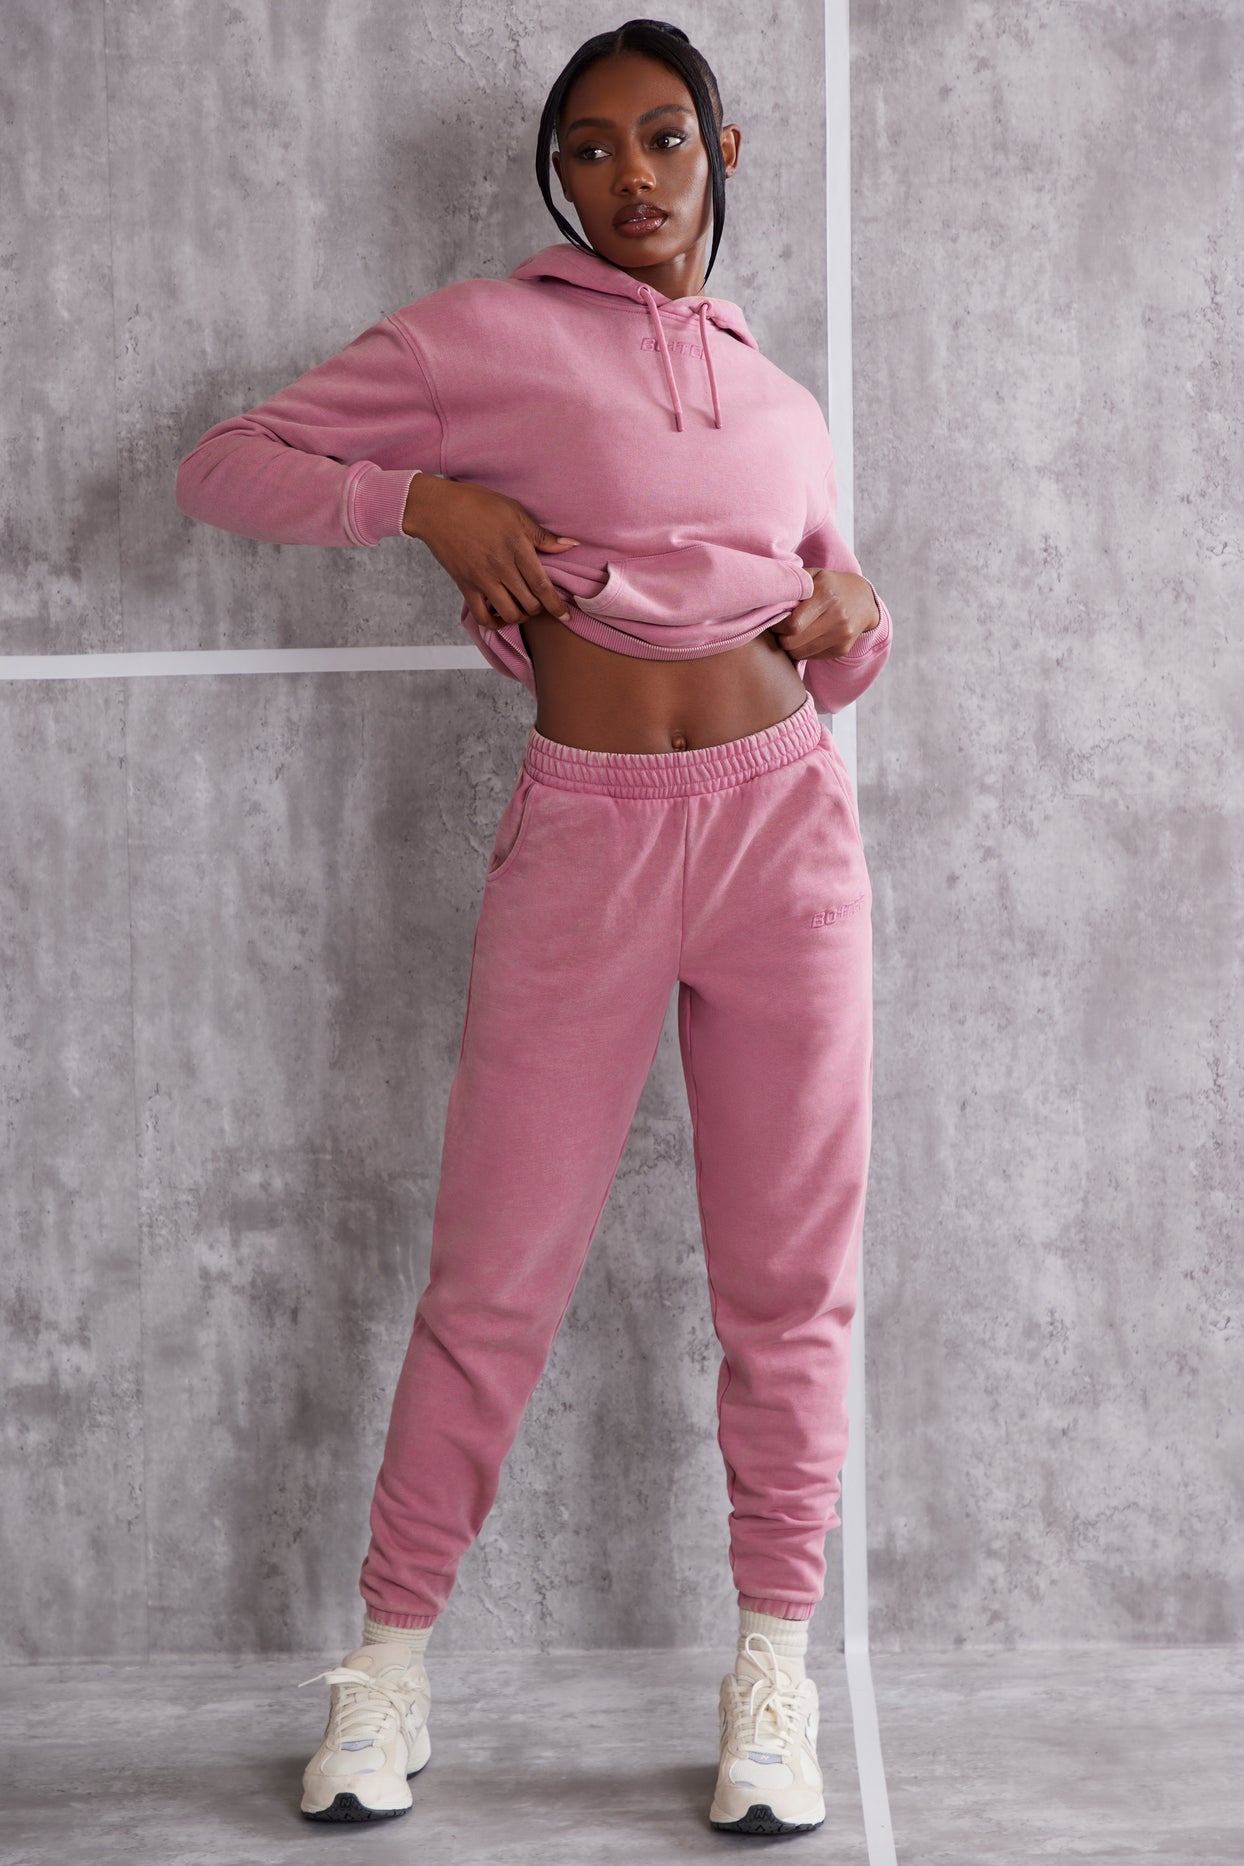 Missguided, Pants & Jumpsuits, Nwt Missguided Ski Pants